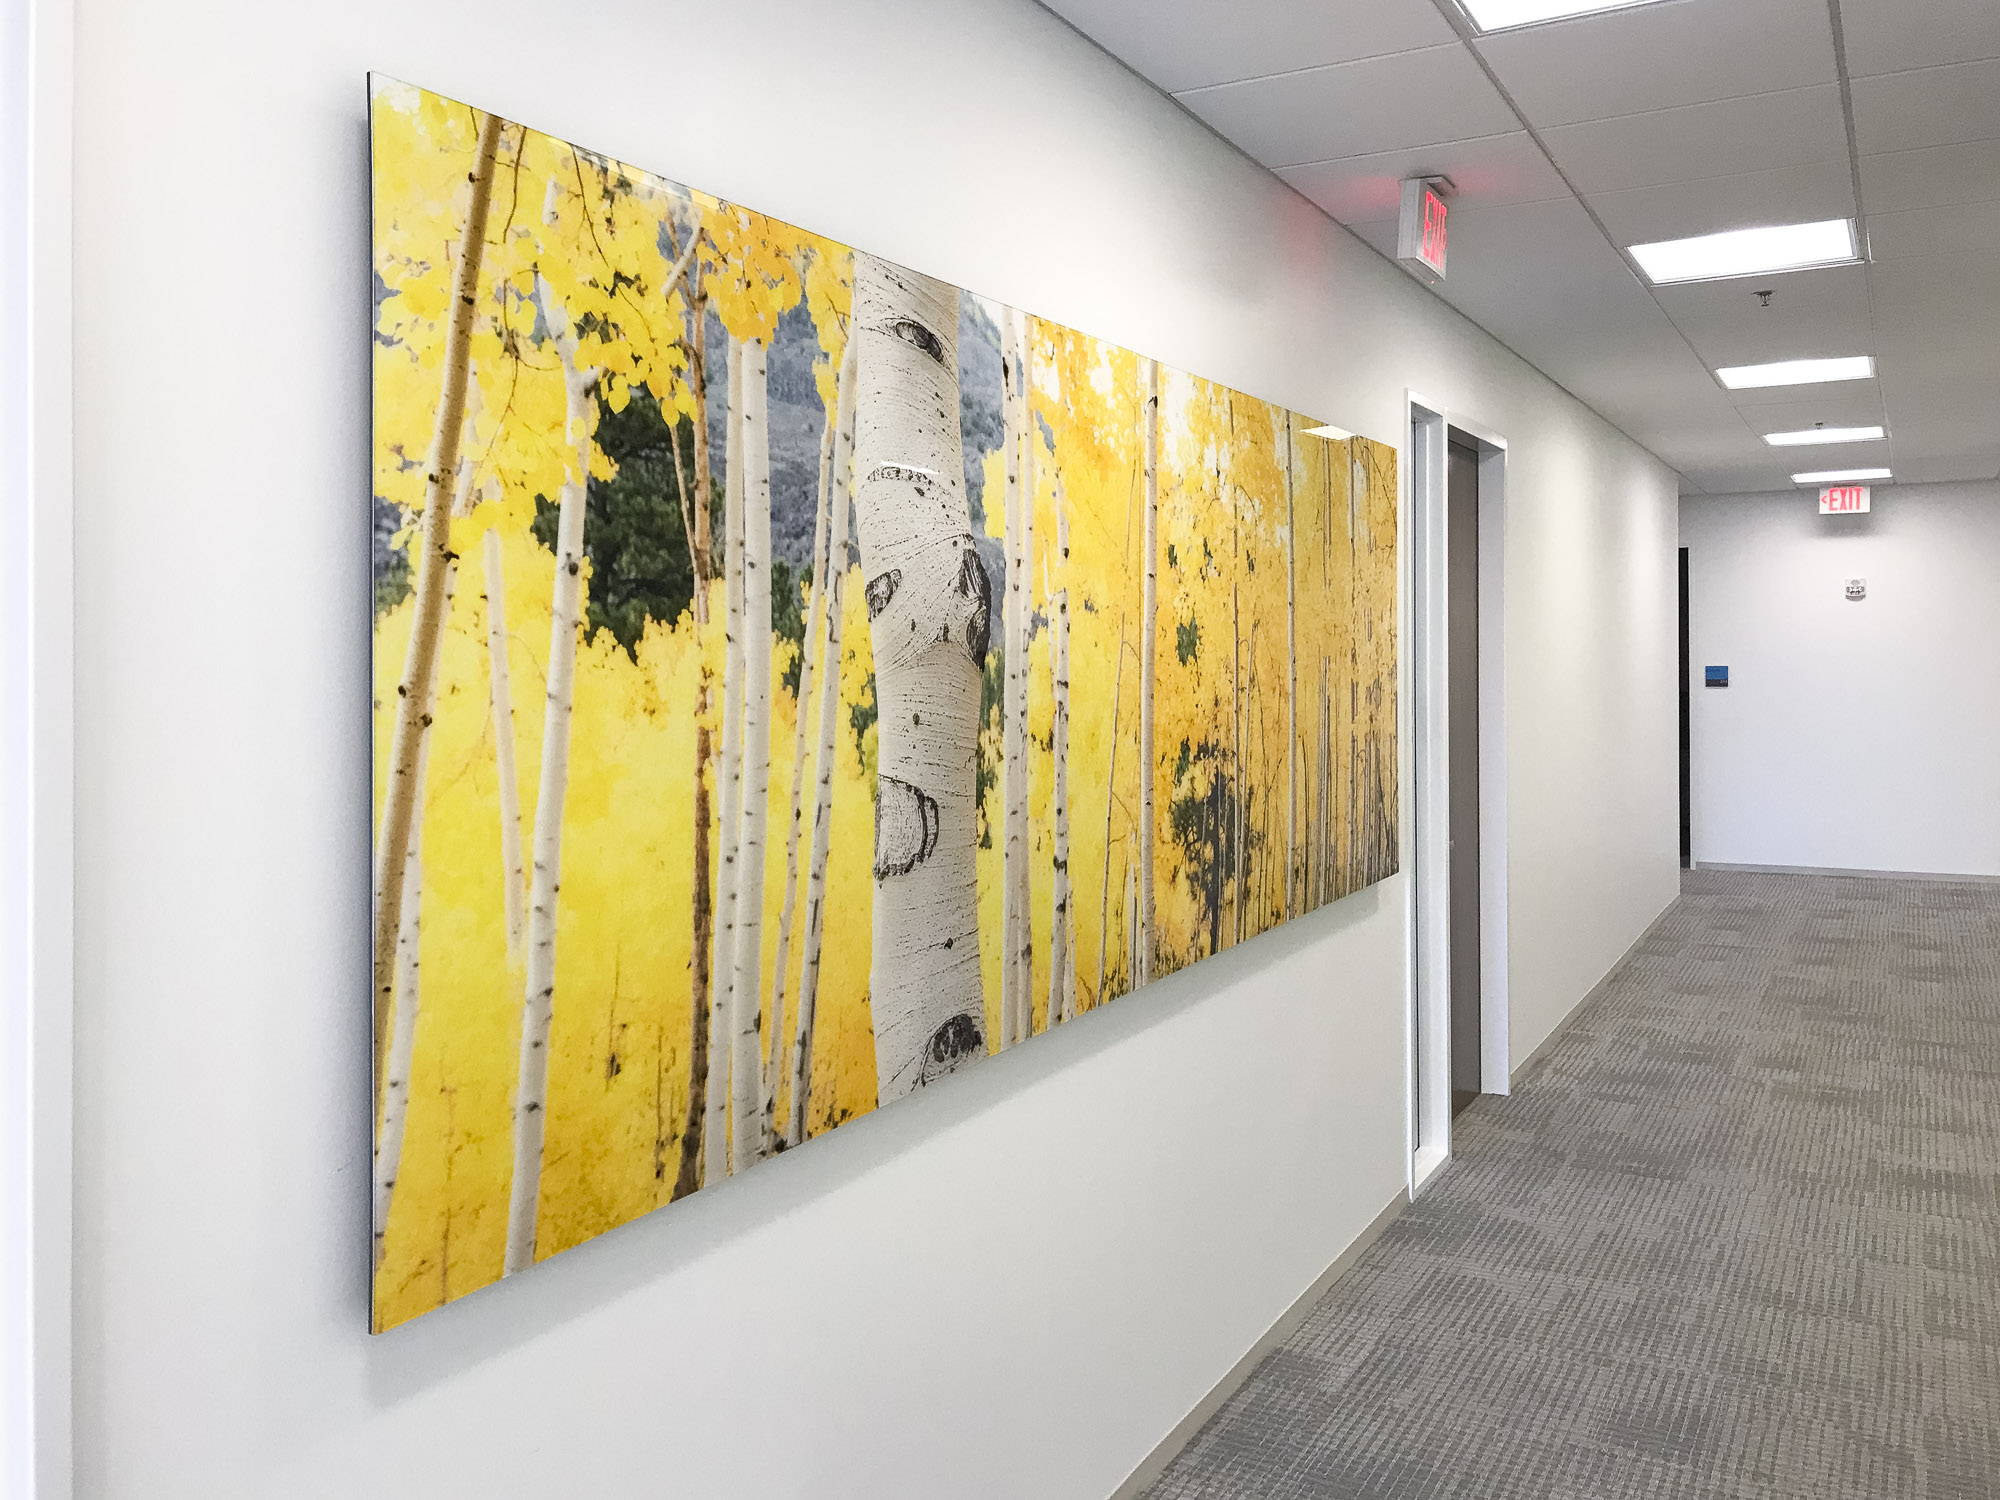 Large format gigapixel photograph in an office hallway